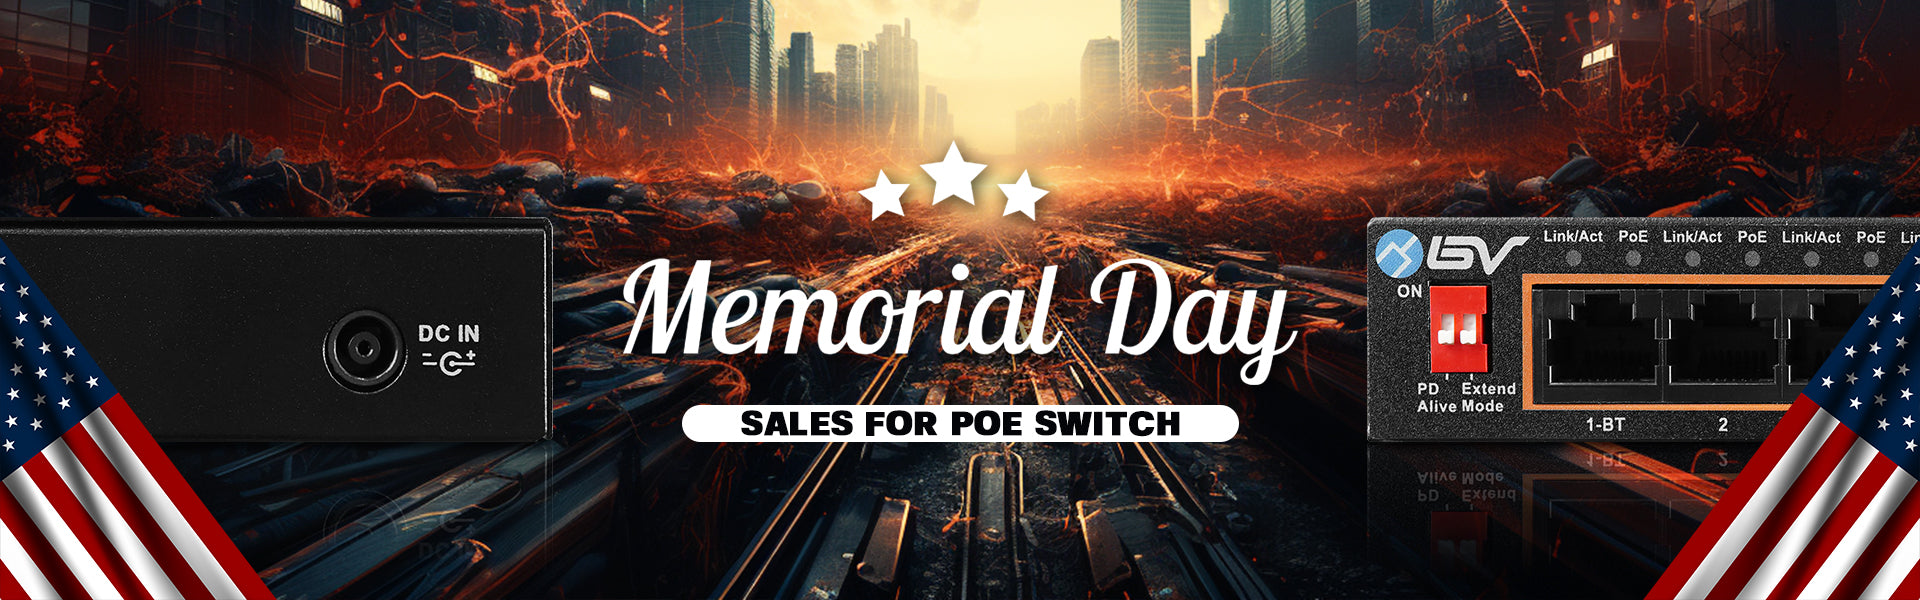 Memorial Day - PoE Switch